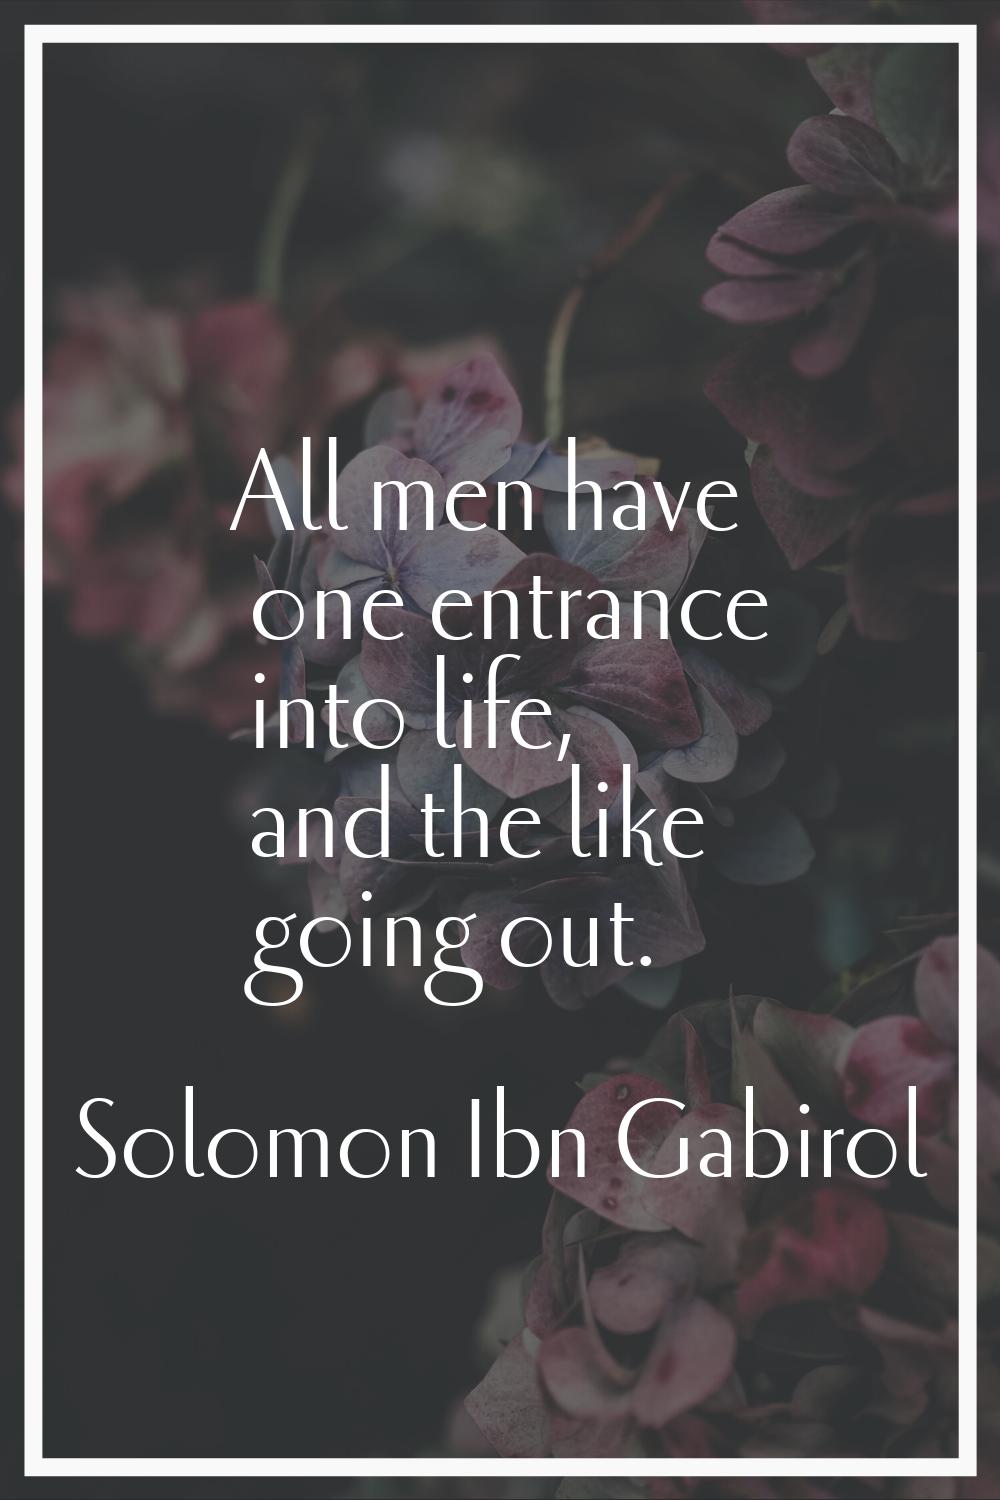 All men have one entrance into life, and the like going out.